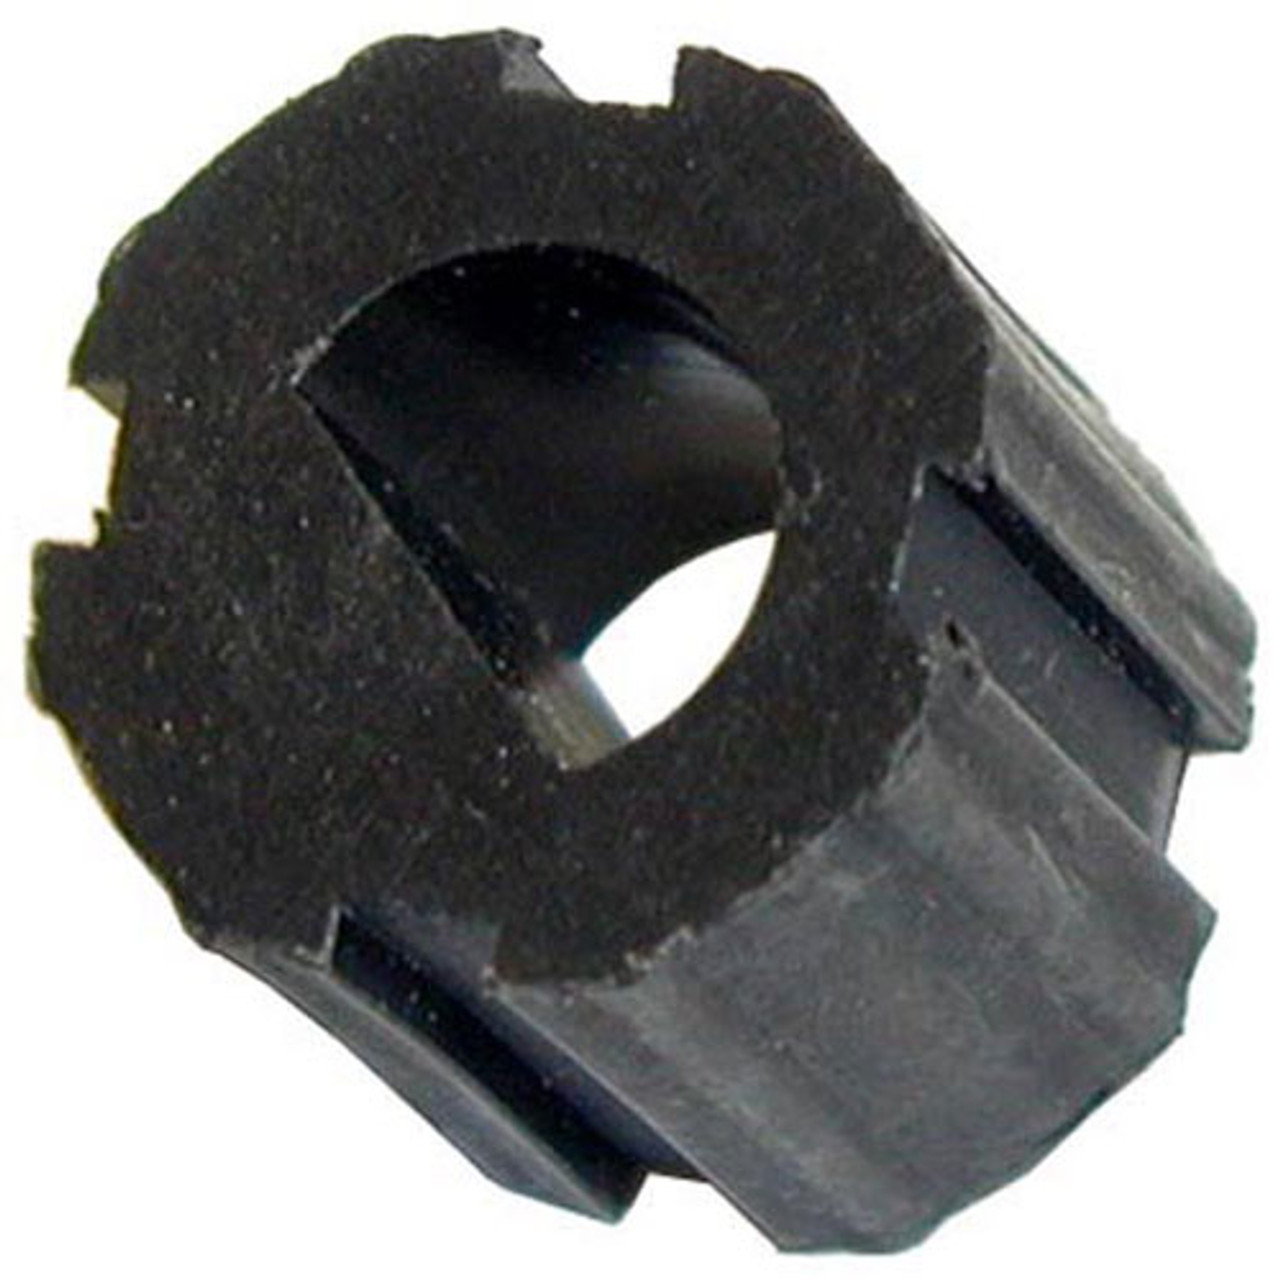 Insert - Replacement Part For Jade Range 300-230-000